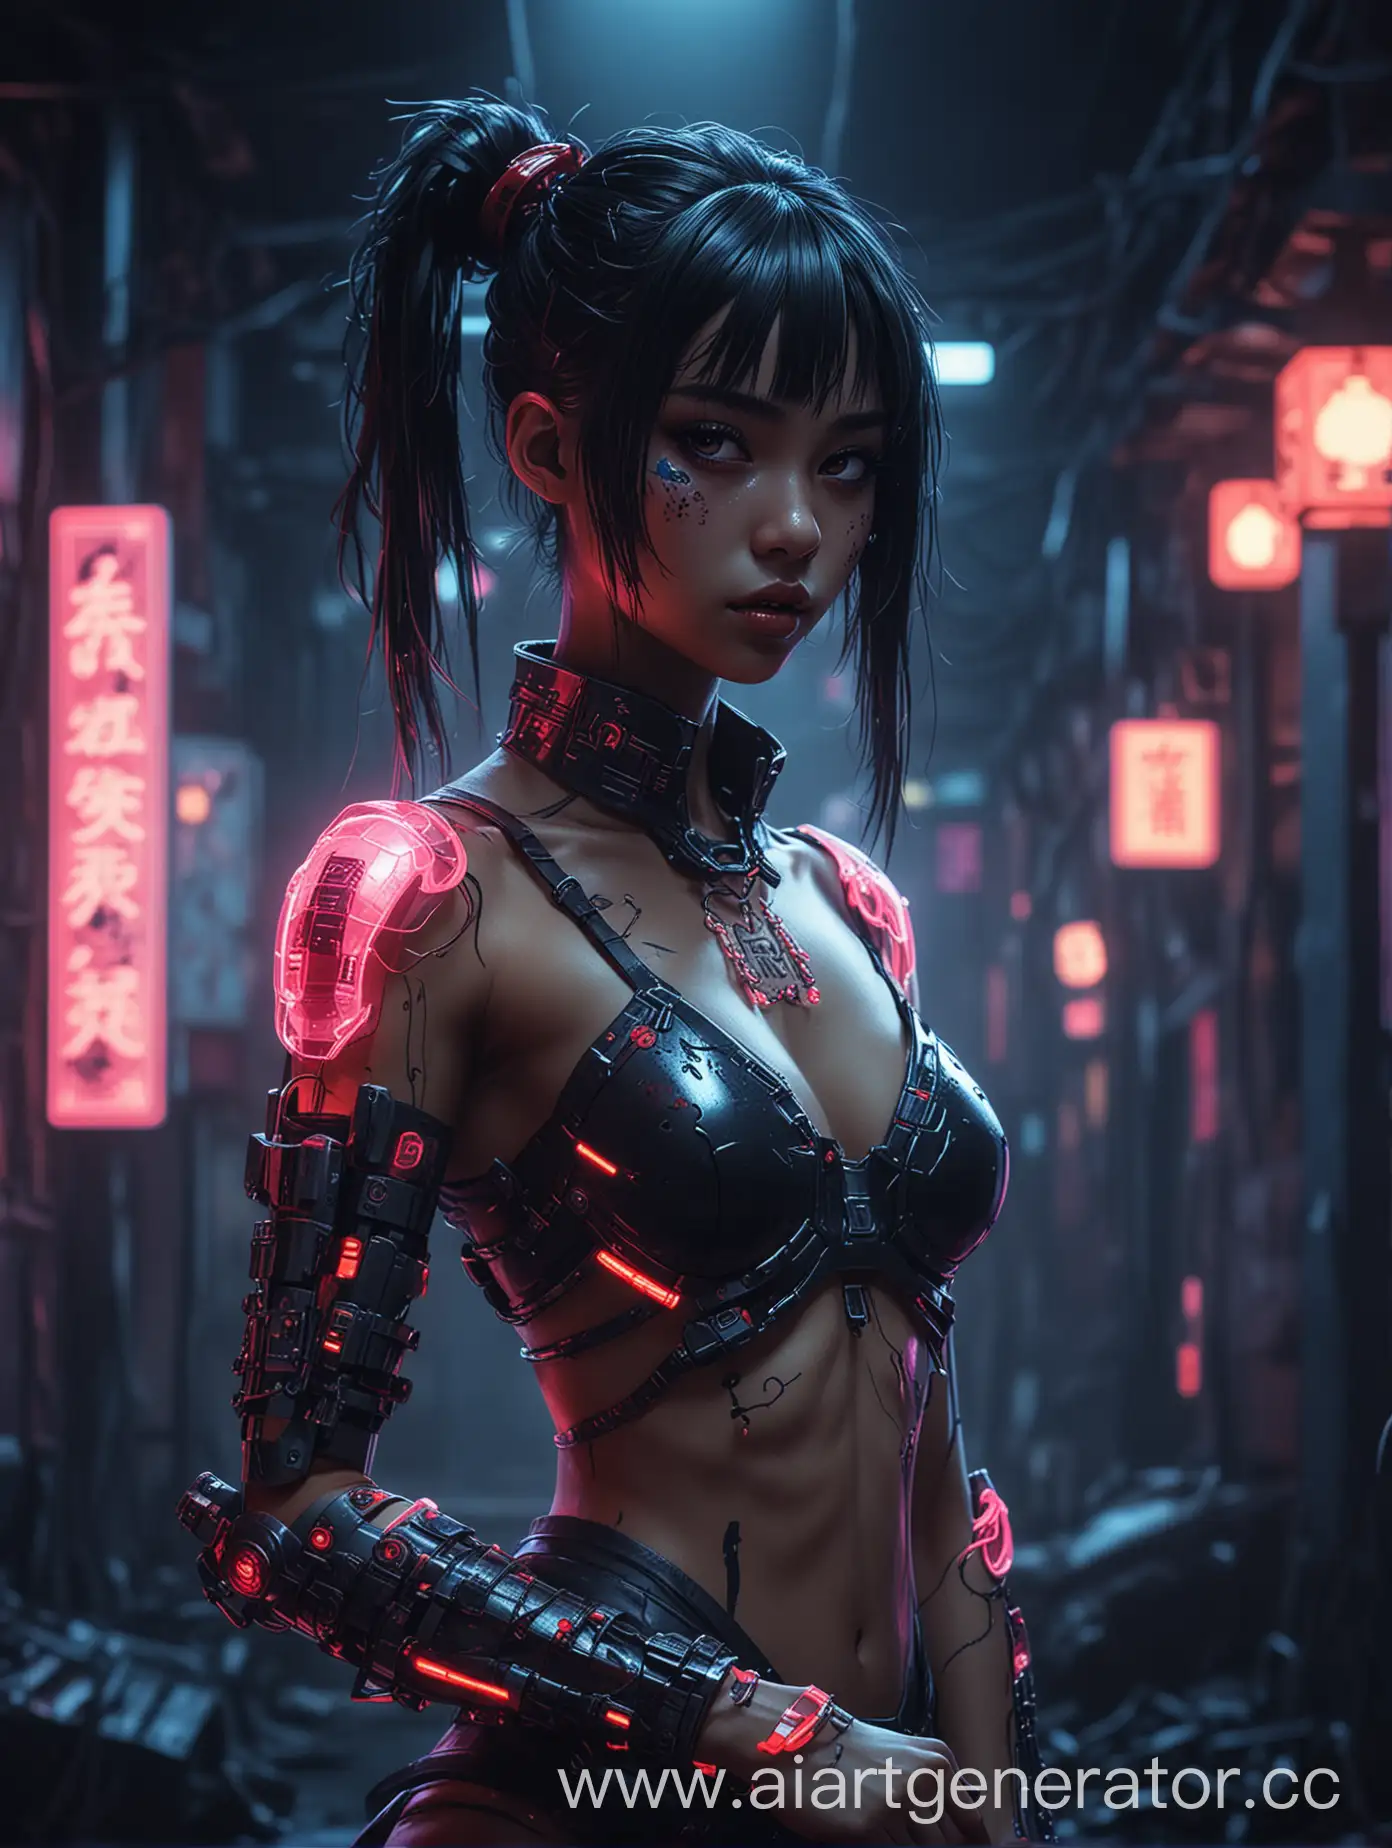 Mysterious-Cyberpunk-Girl-with-Glowing-Neon-China-Arm-in-Fantasy-Horror-Setting